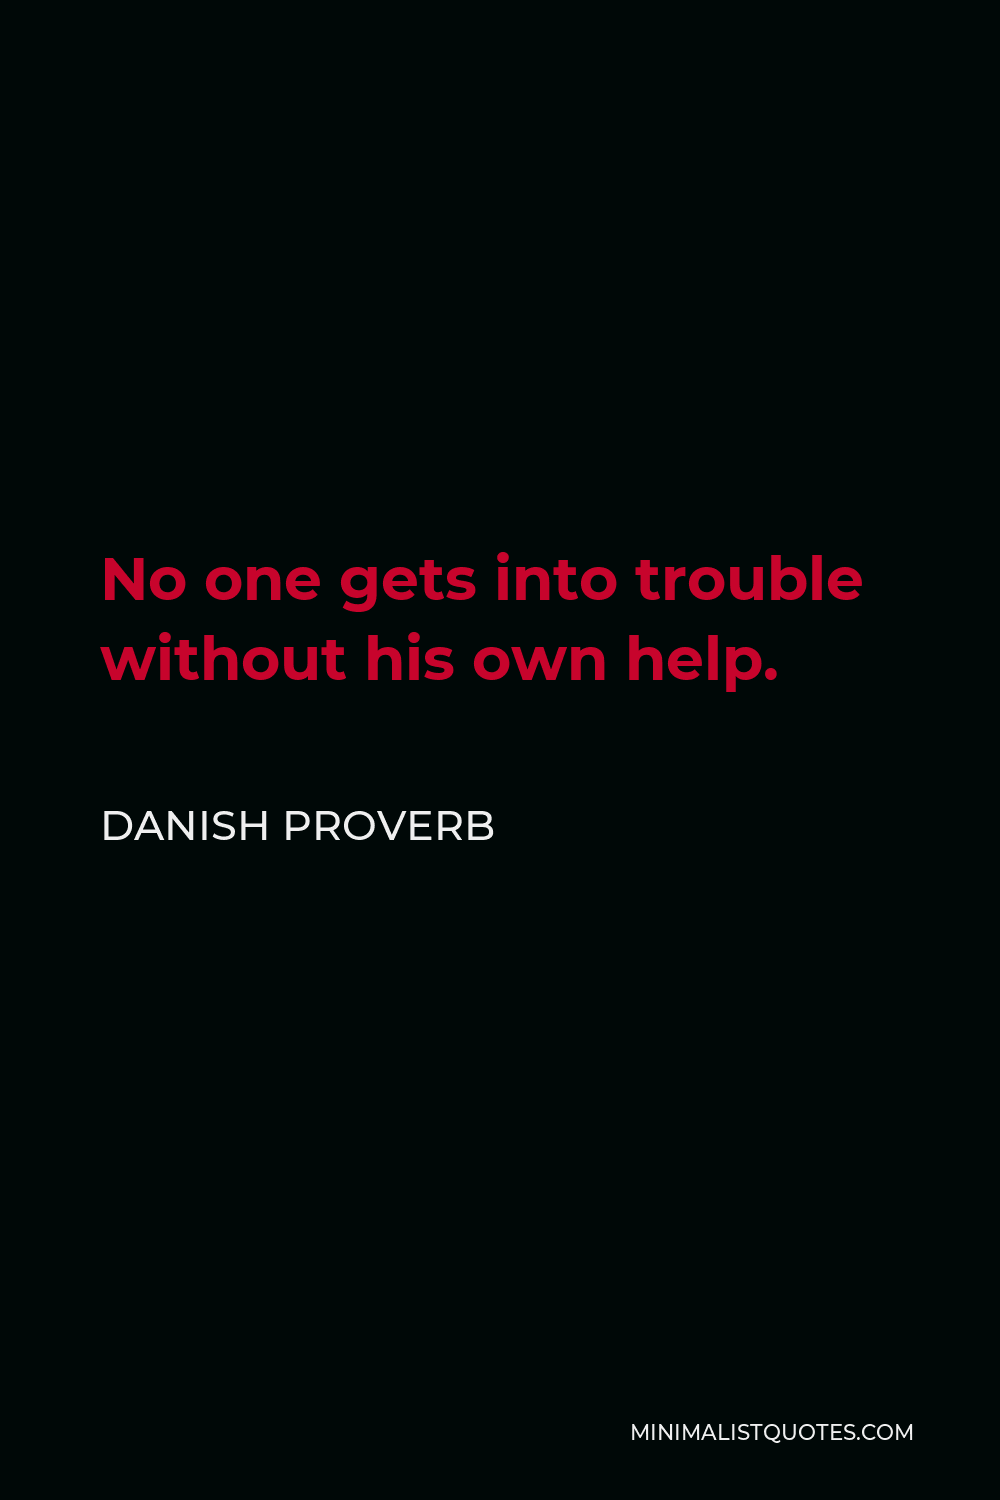 Danish Proverb Quote - No one gets into trouble without his own help.